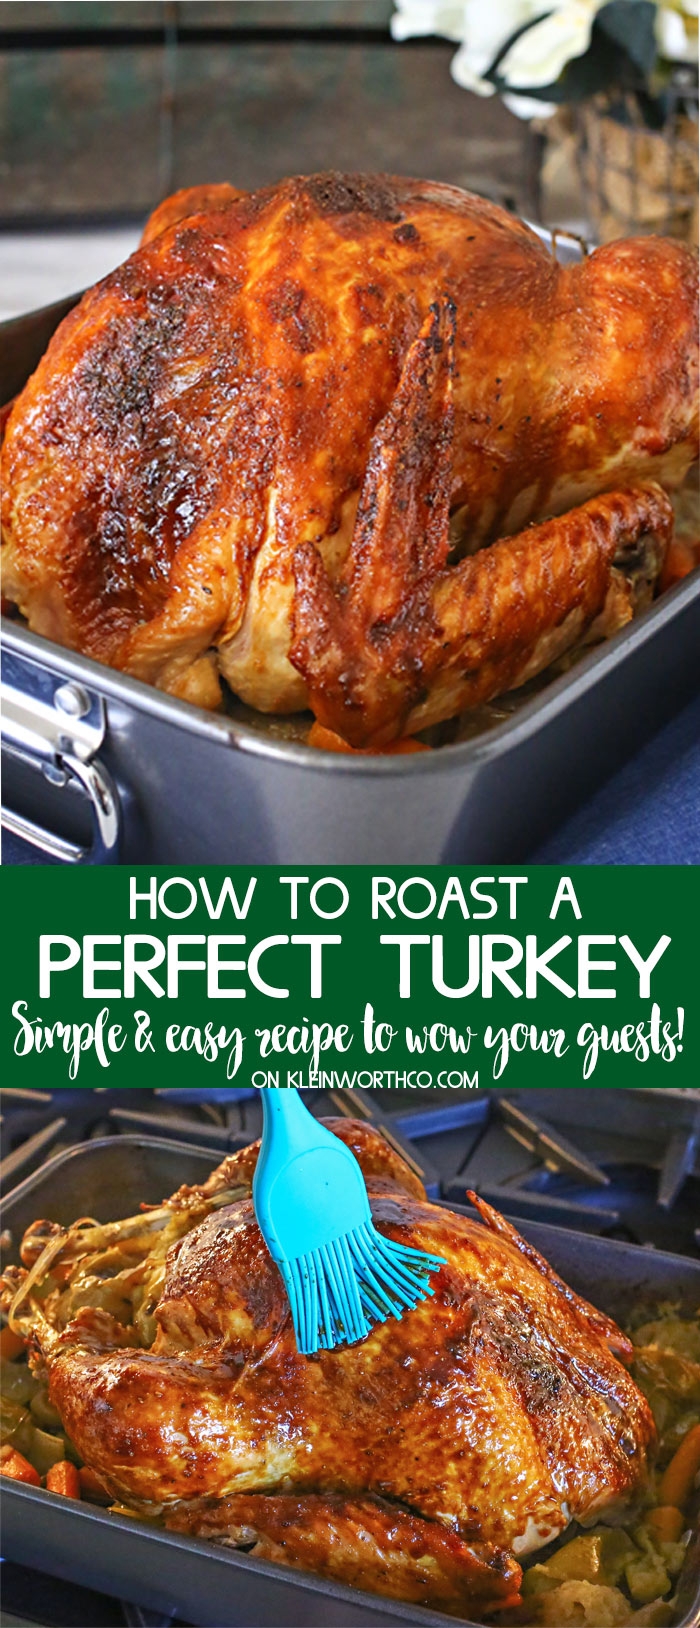 How to Roast a Perfect Turkey